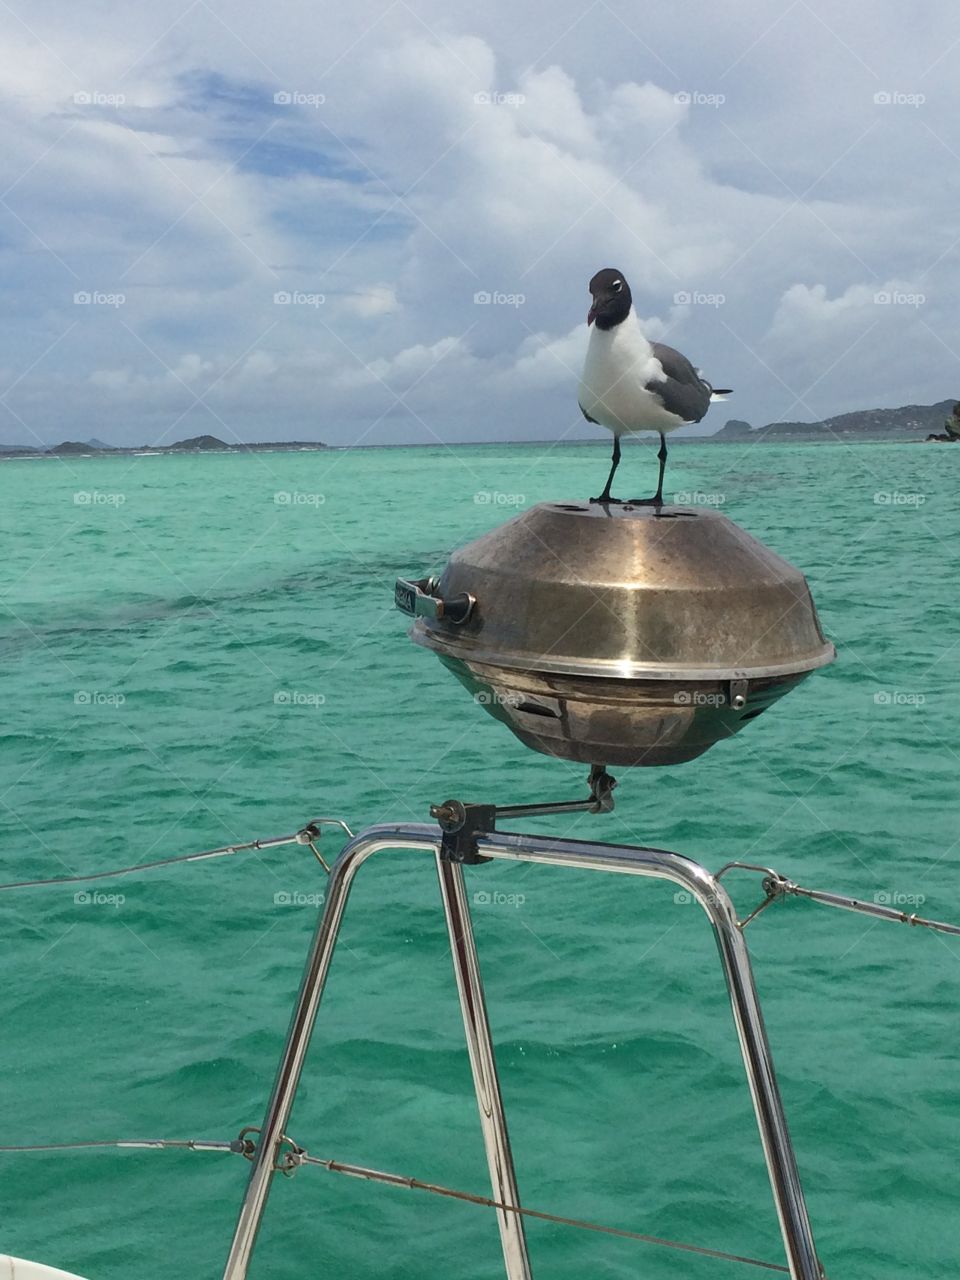 Seagull sitting on top of BBQ grill on a sailboat in the Grenadines with calm turquoise water